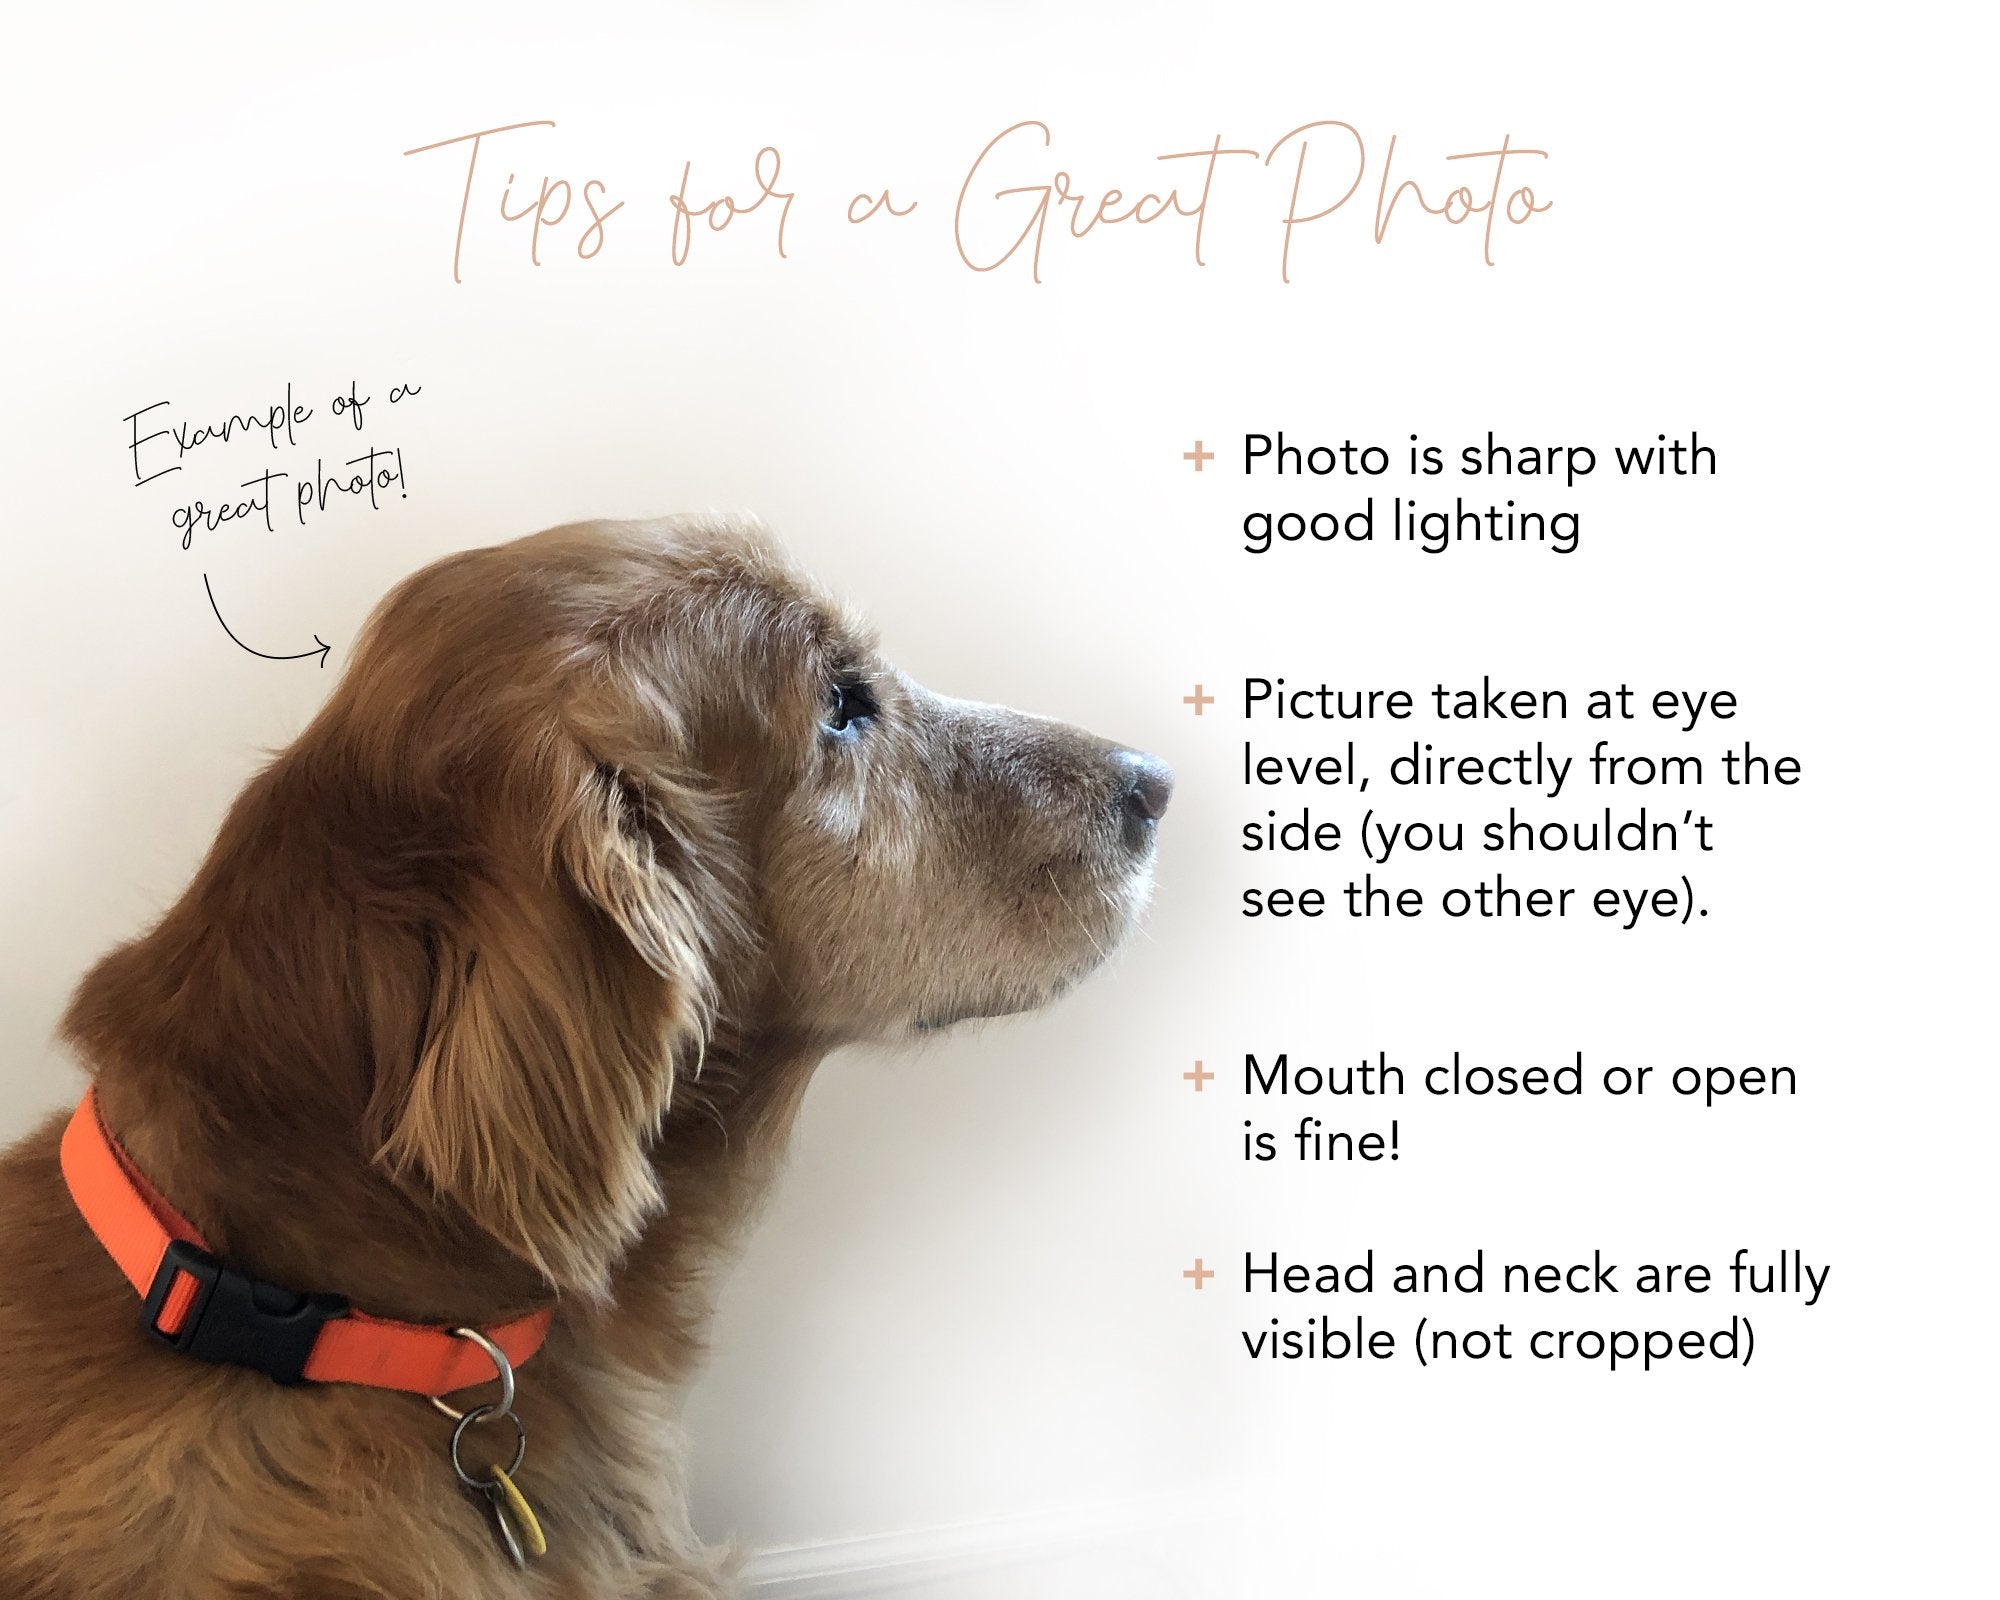 Tips for taking the best photos for a custom dog silhouette order